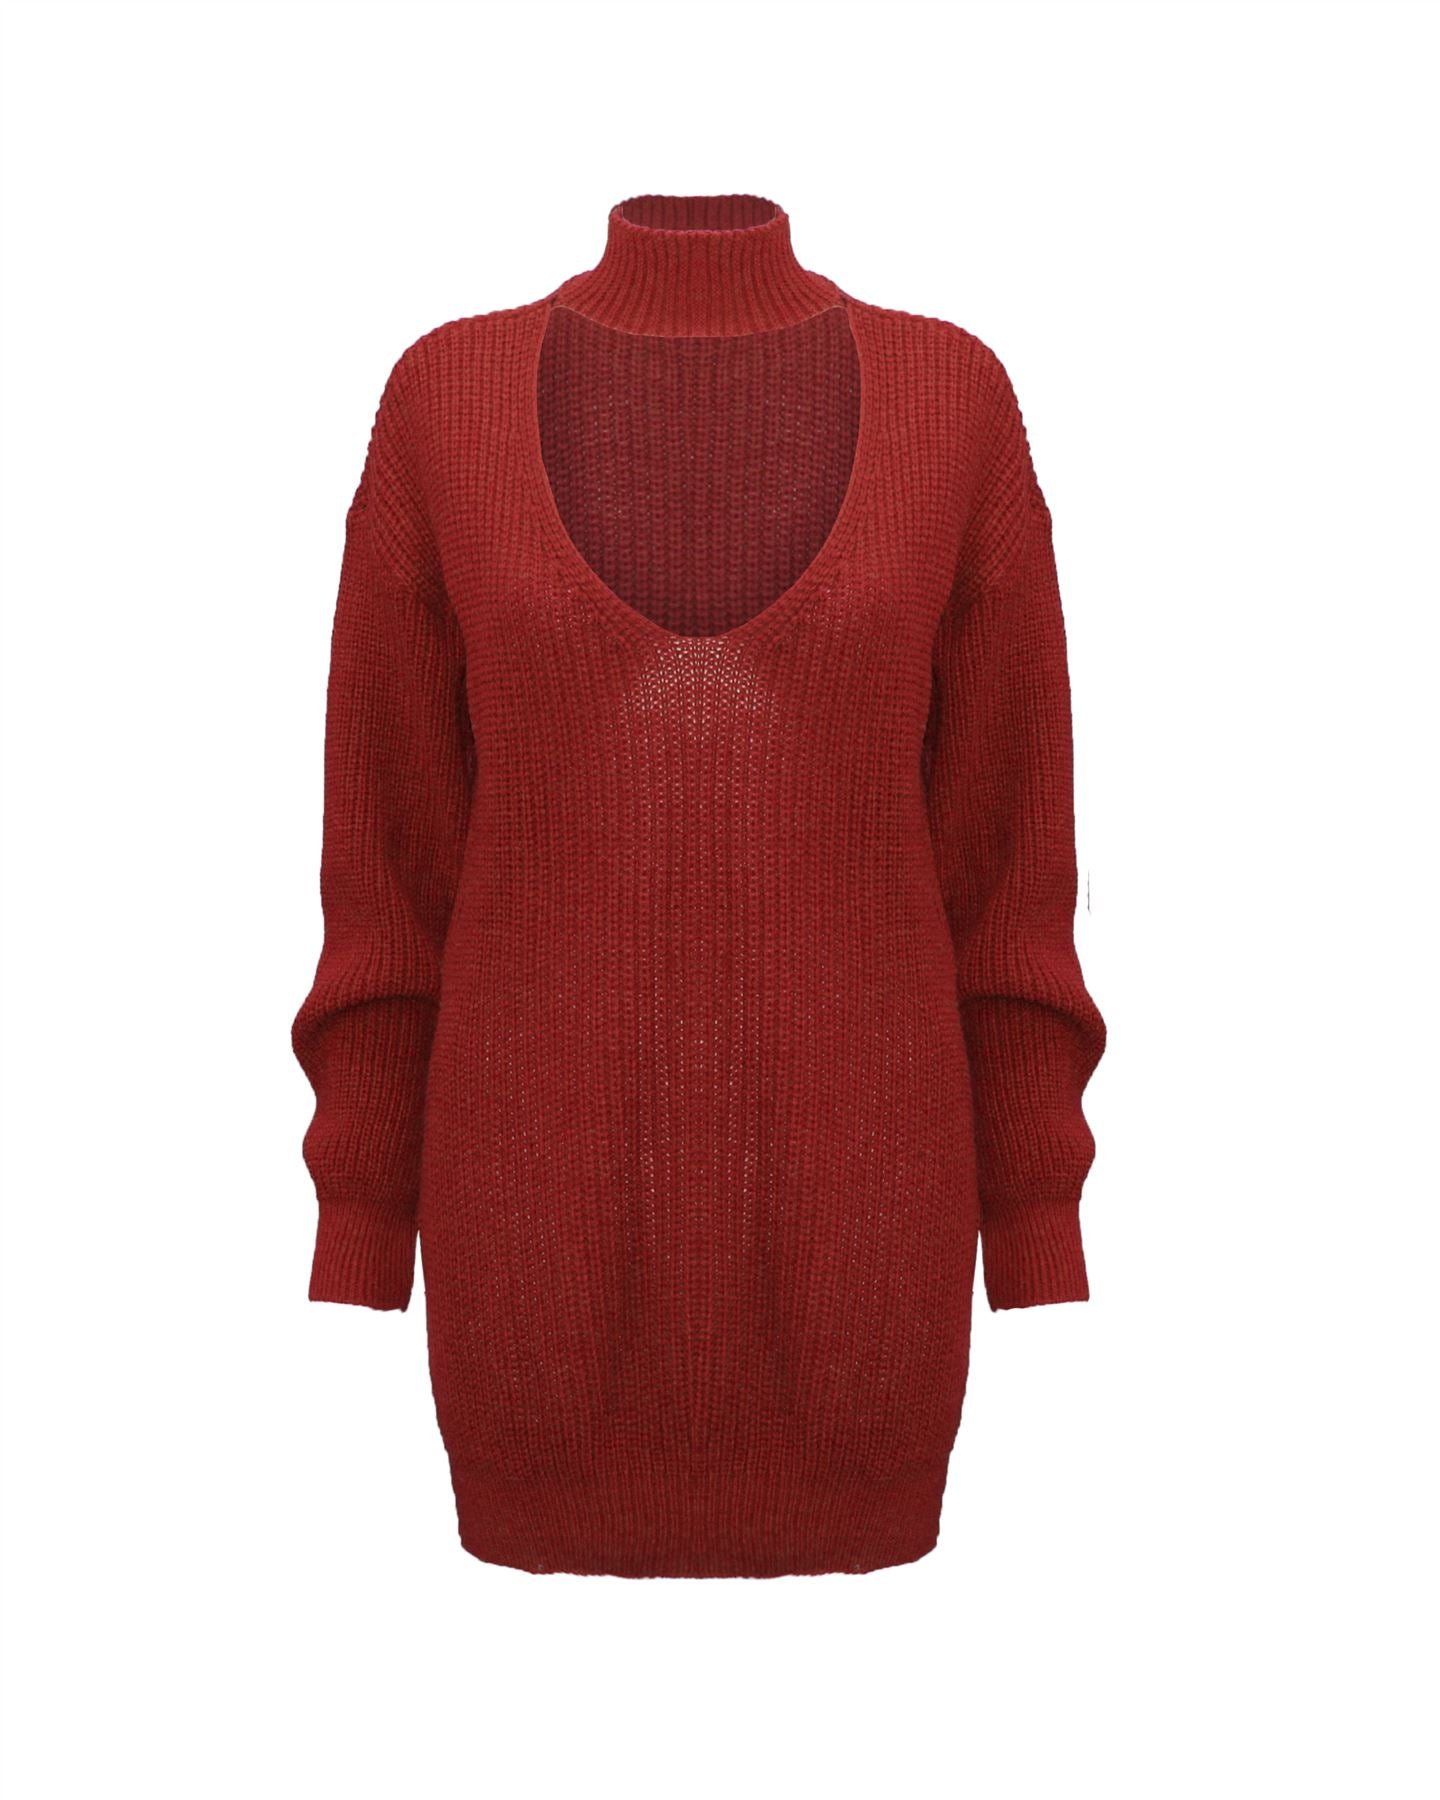 New Ladies Women Knitted Long Sleeve Choker Neck Colour Jumper Top Sweater 8-18